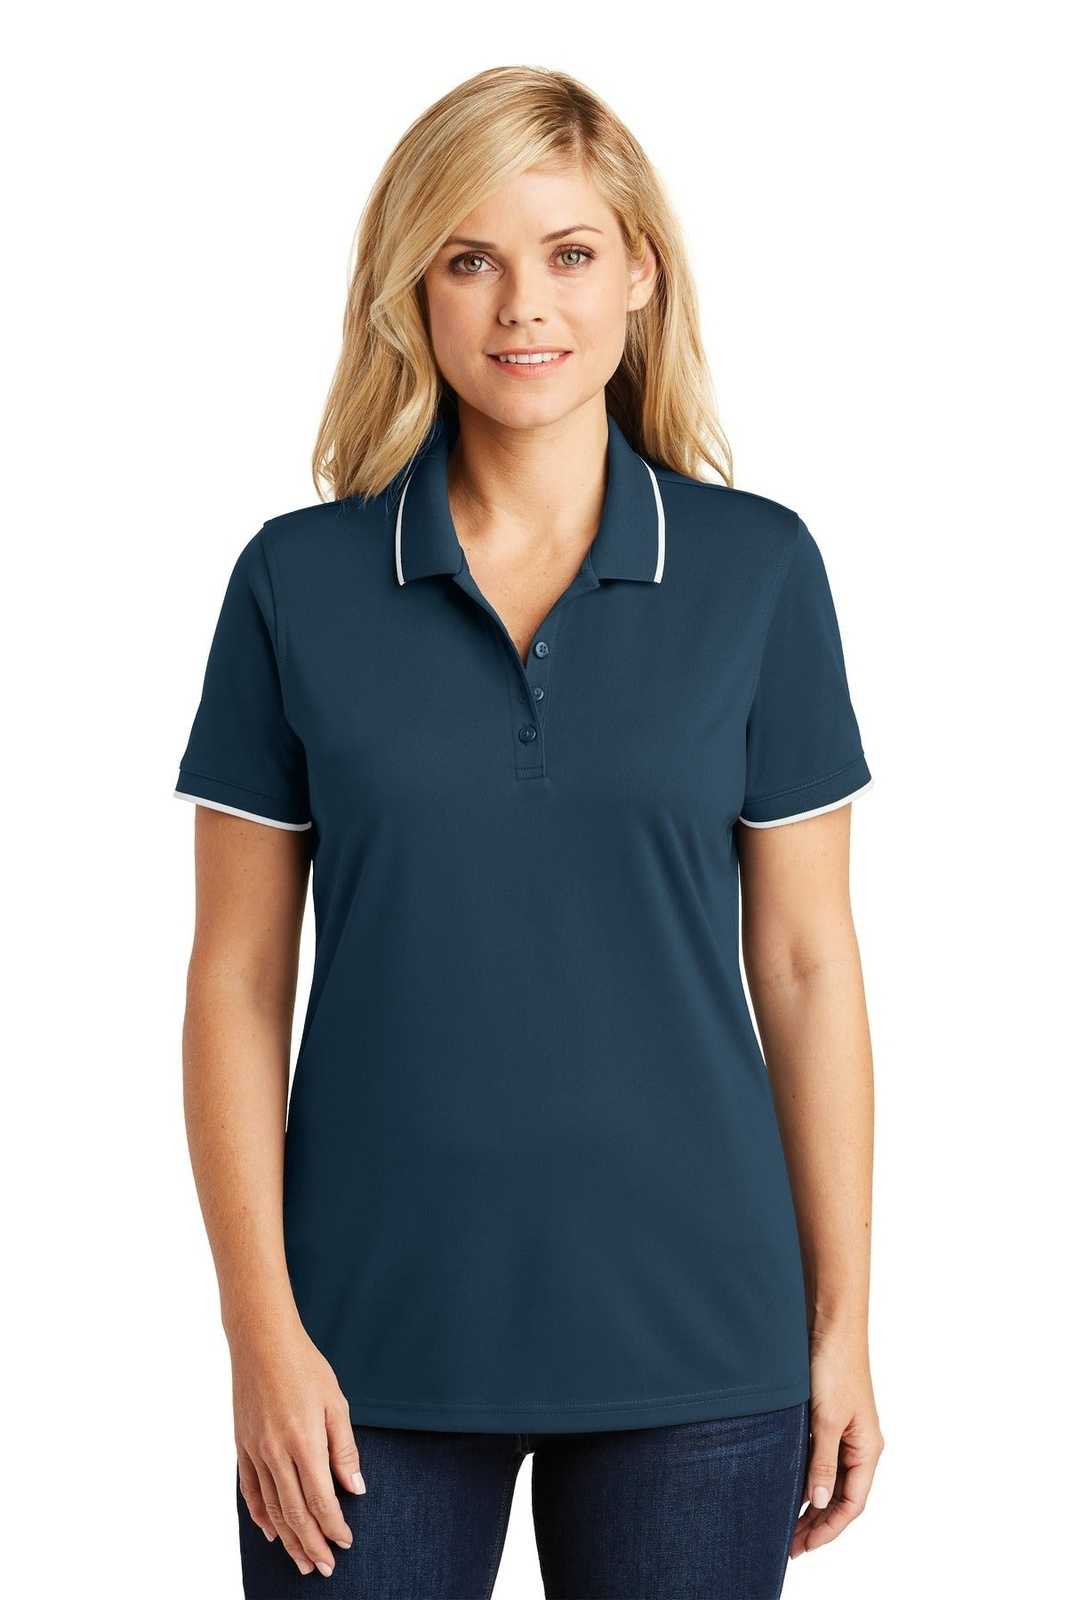 Port Authority LK111 Ladies Dry Zone UV Micro-Mesh Tipped Polo - River Blue Navy White - HIT a Double - 1